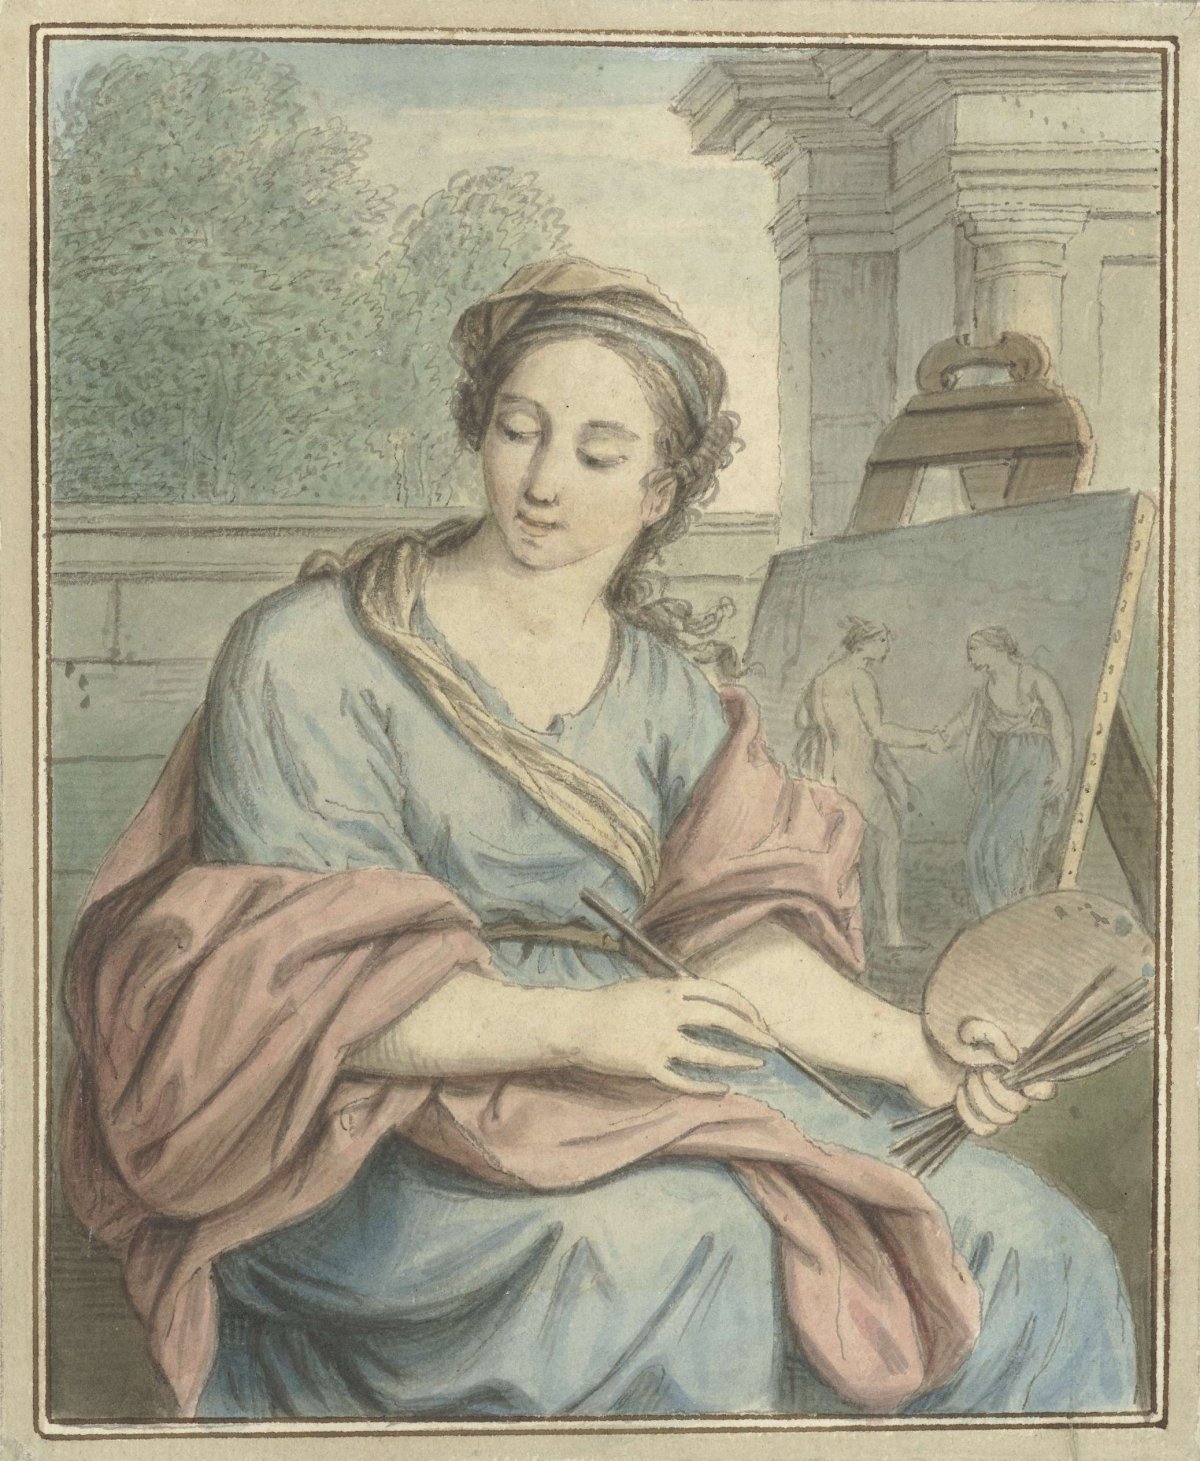 The Art of Painting, Louis Fabritius Dubourg, 1703 - 1775